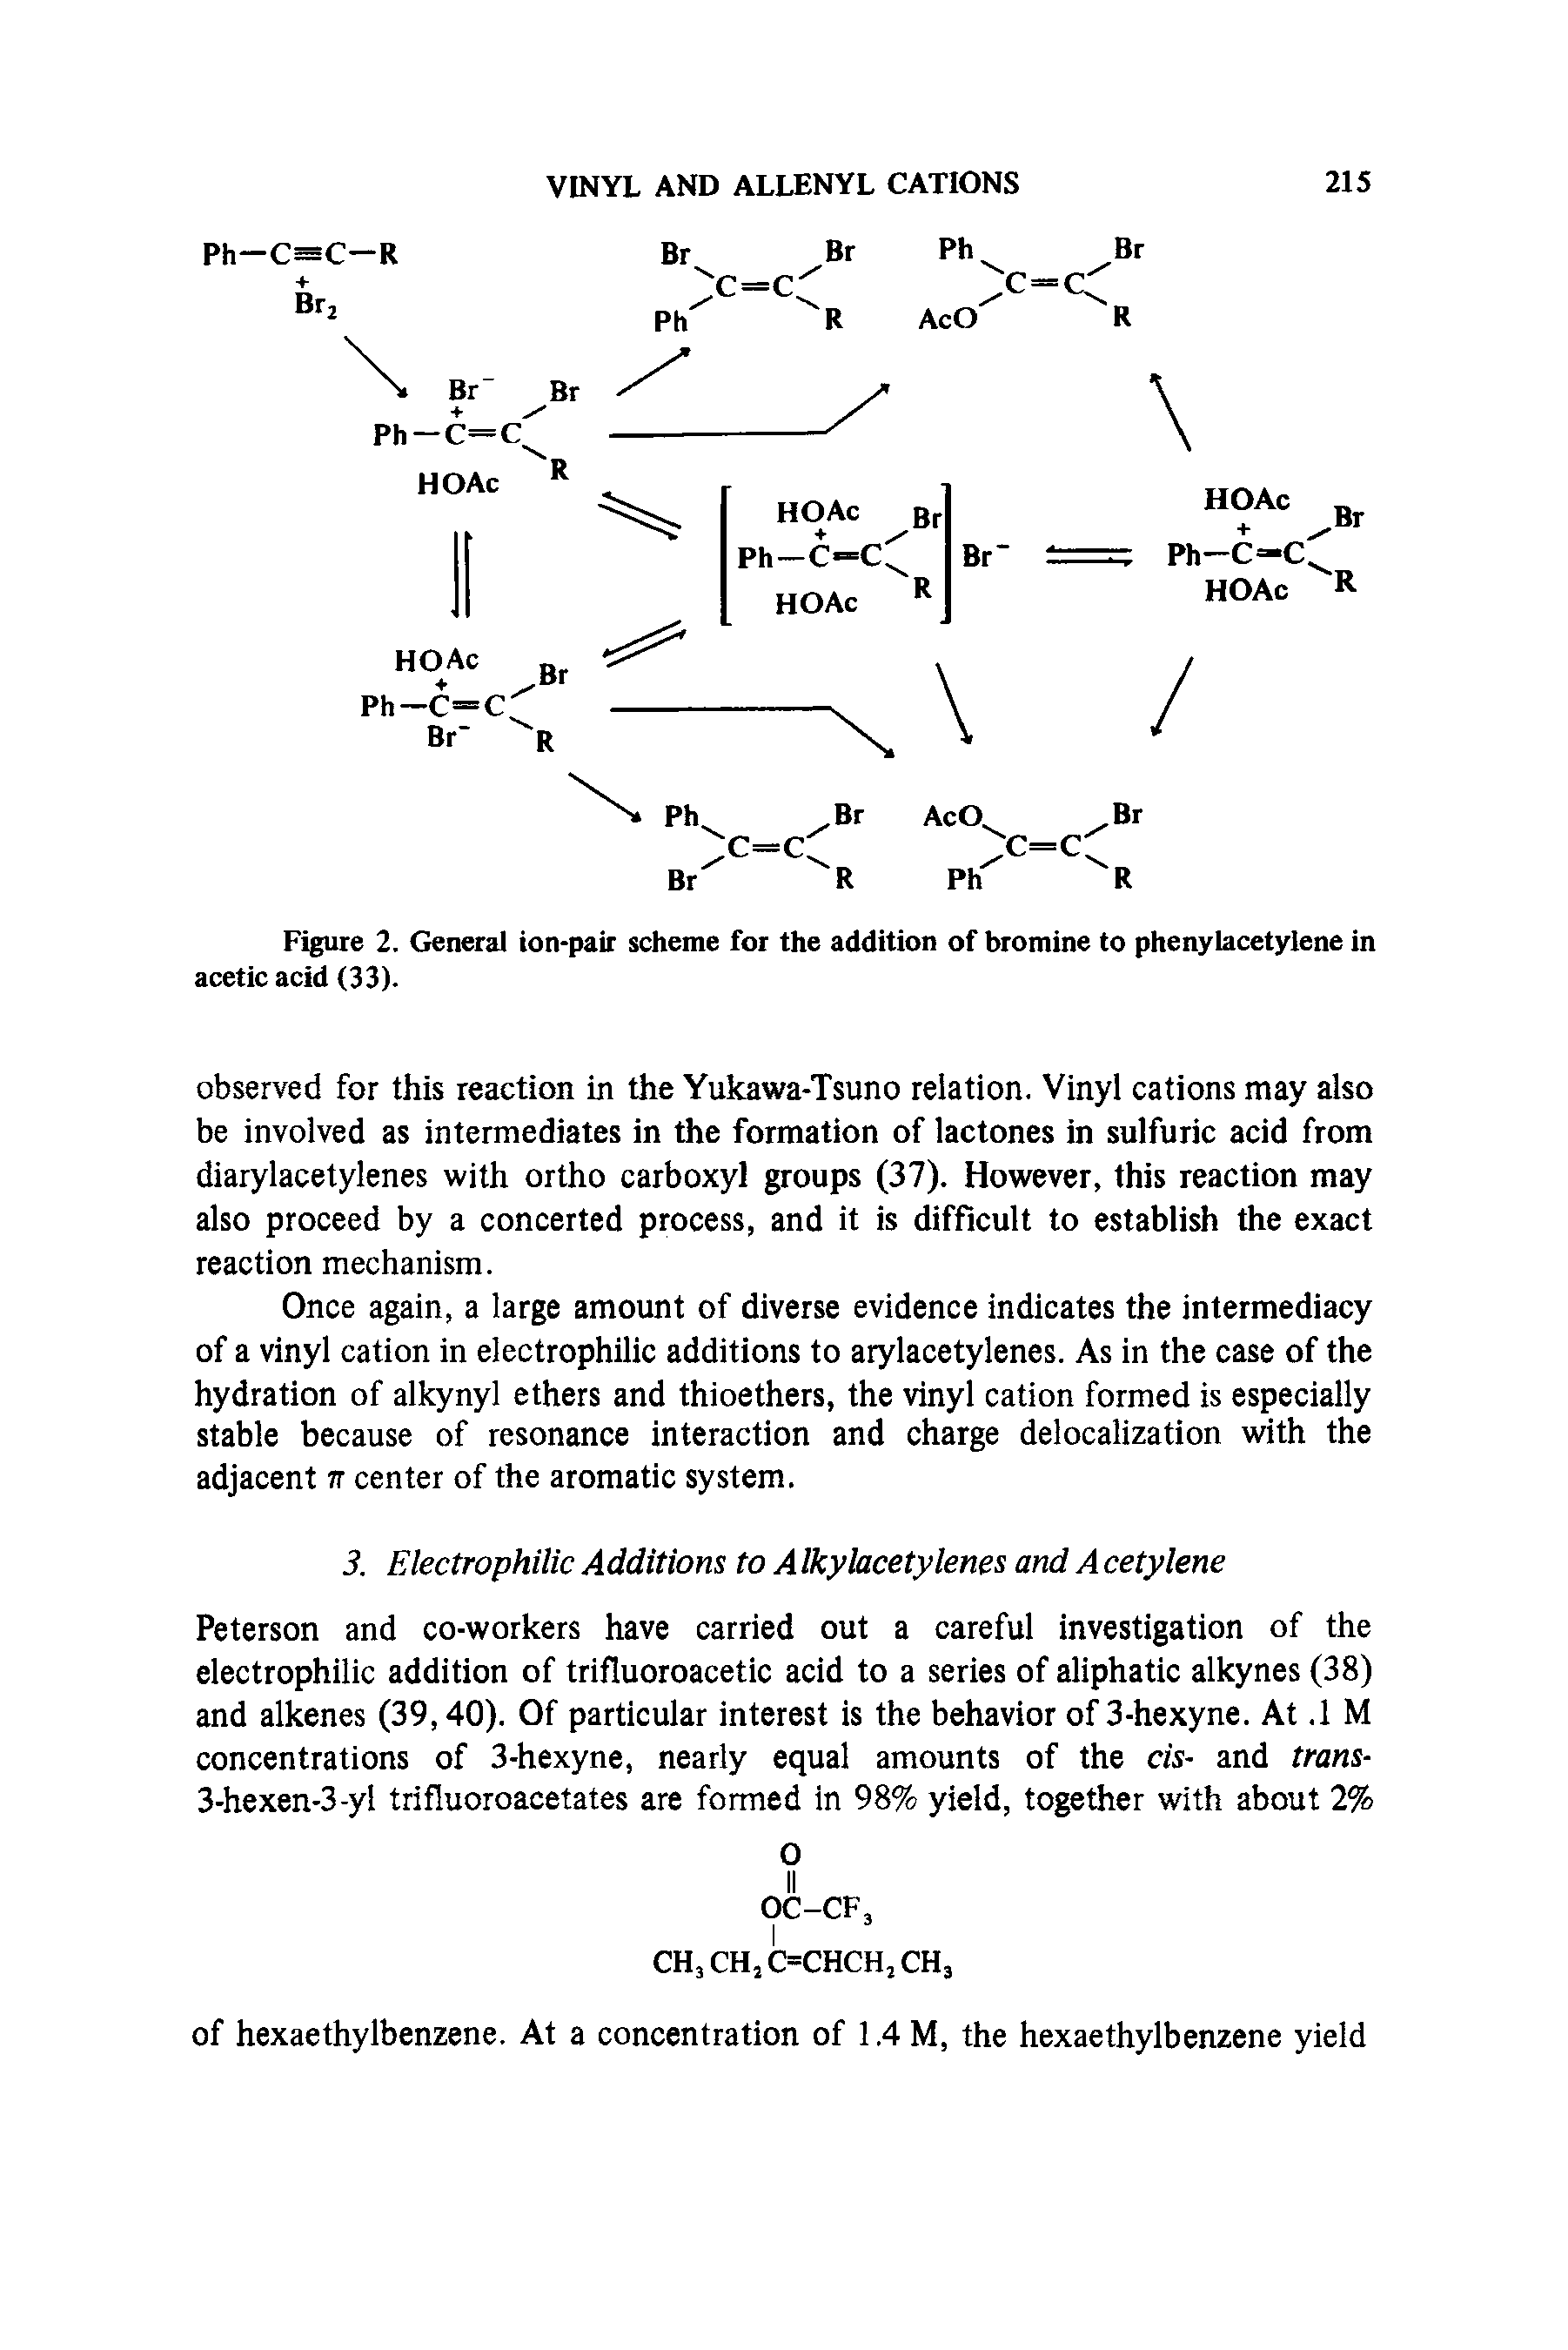 Figure 2. General ton-pair scheme for the addition of bromine to phenylacetylene in acetic acid (33).